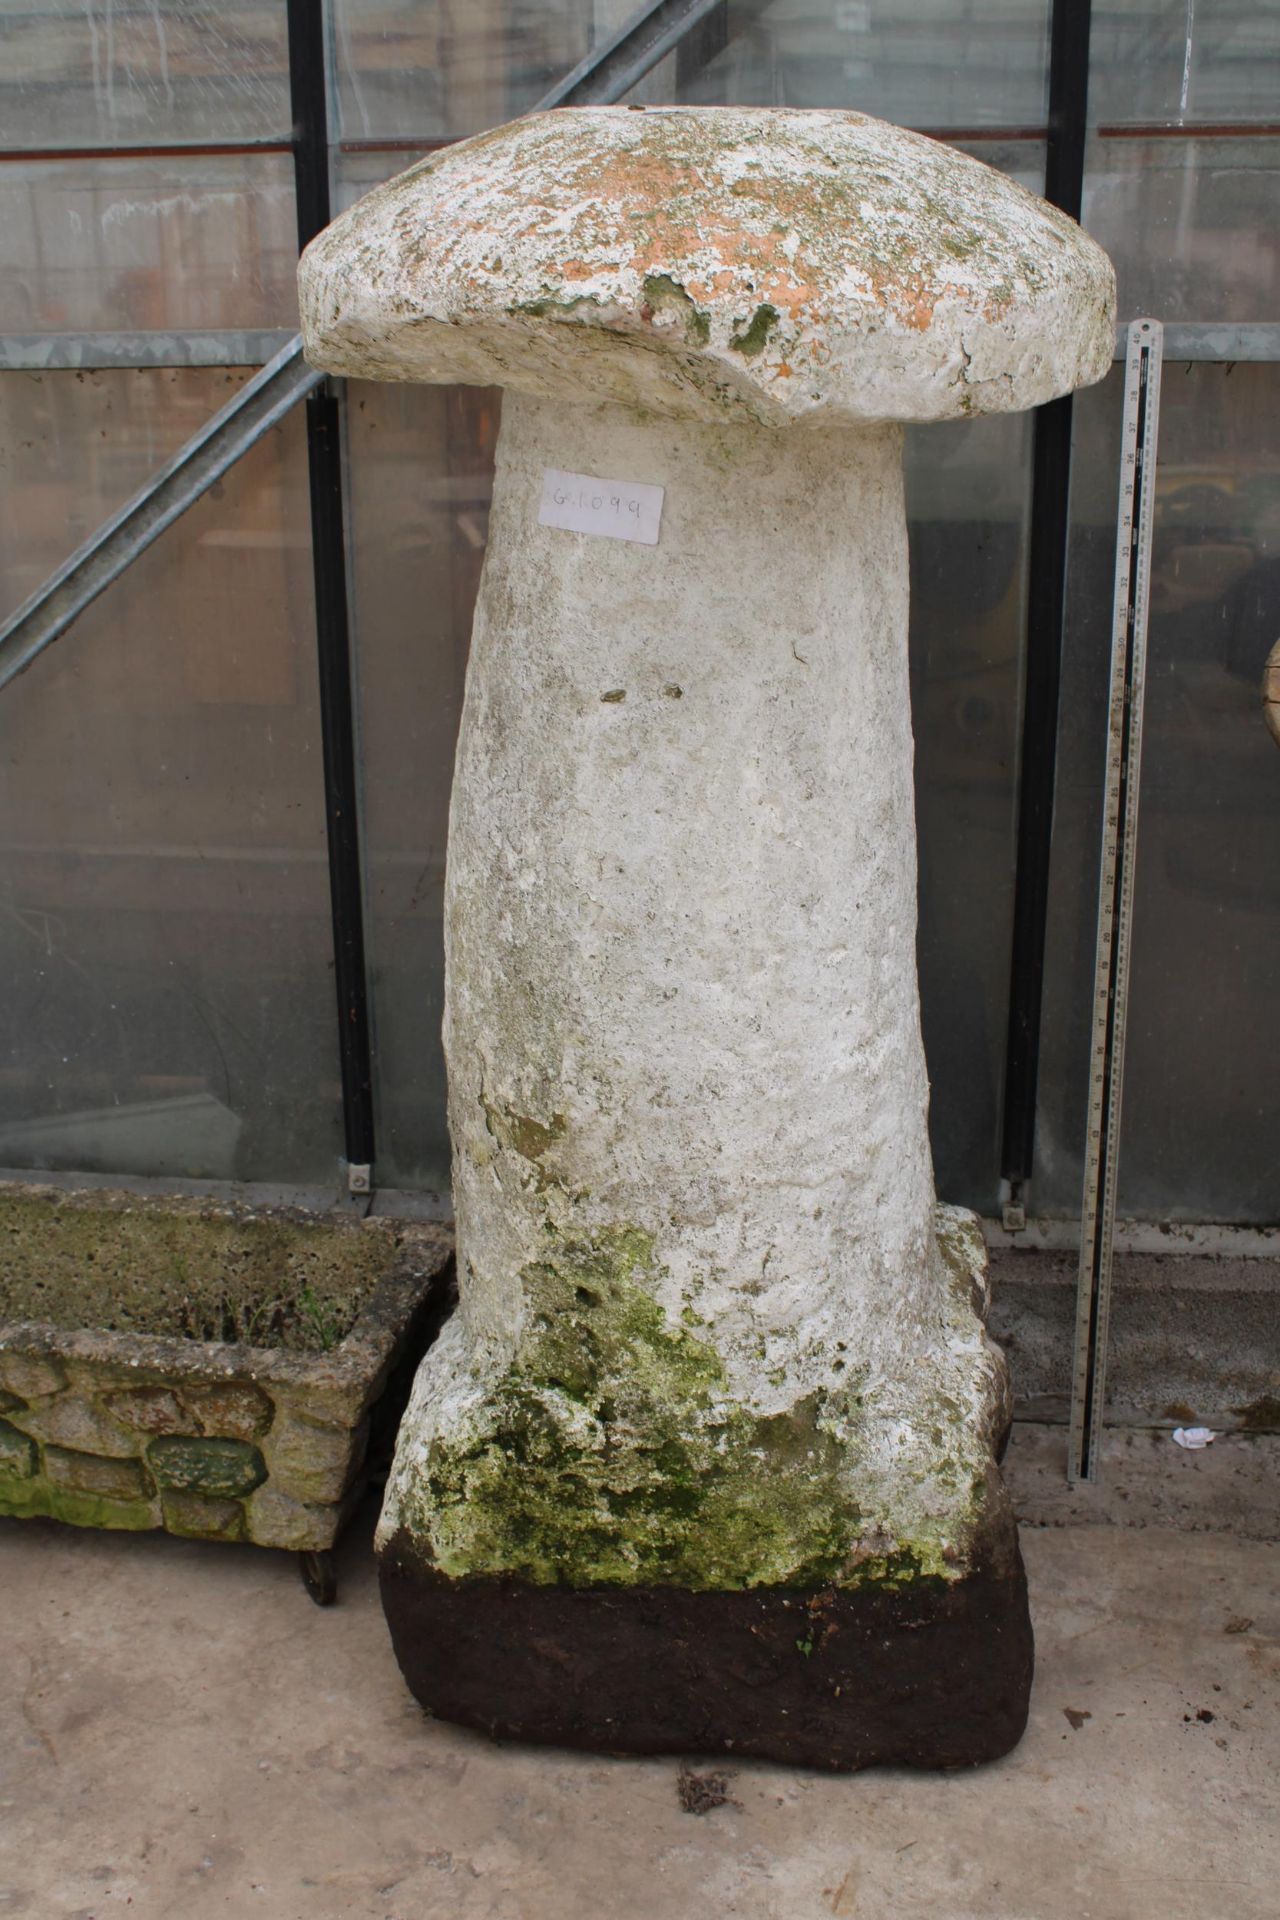 A LARGE SANDSTONE STADDLE STONE STYLE GARDEN FEATURE (H:116CM)